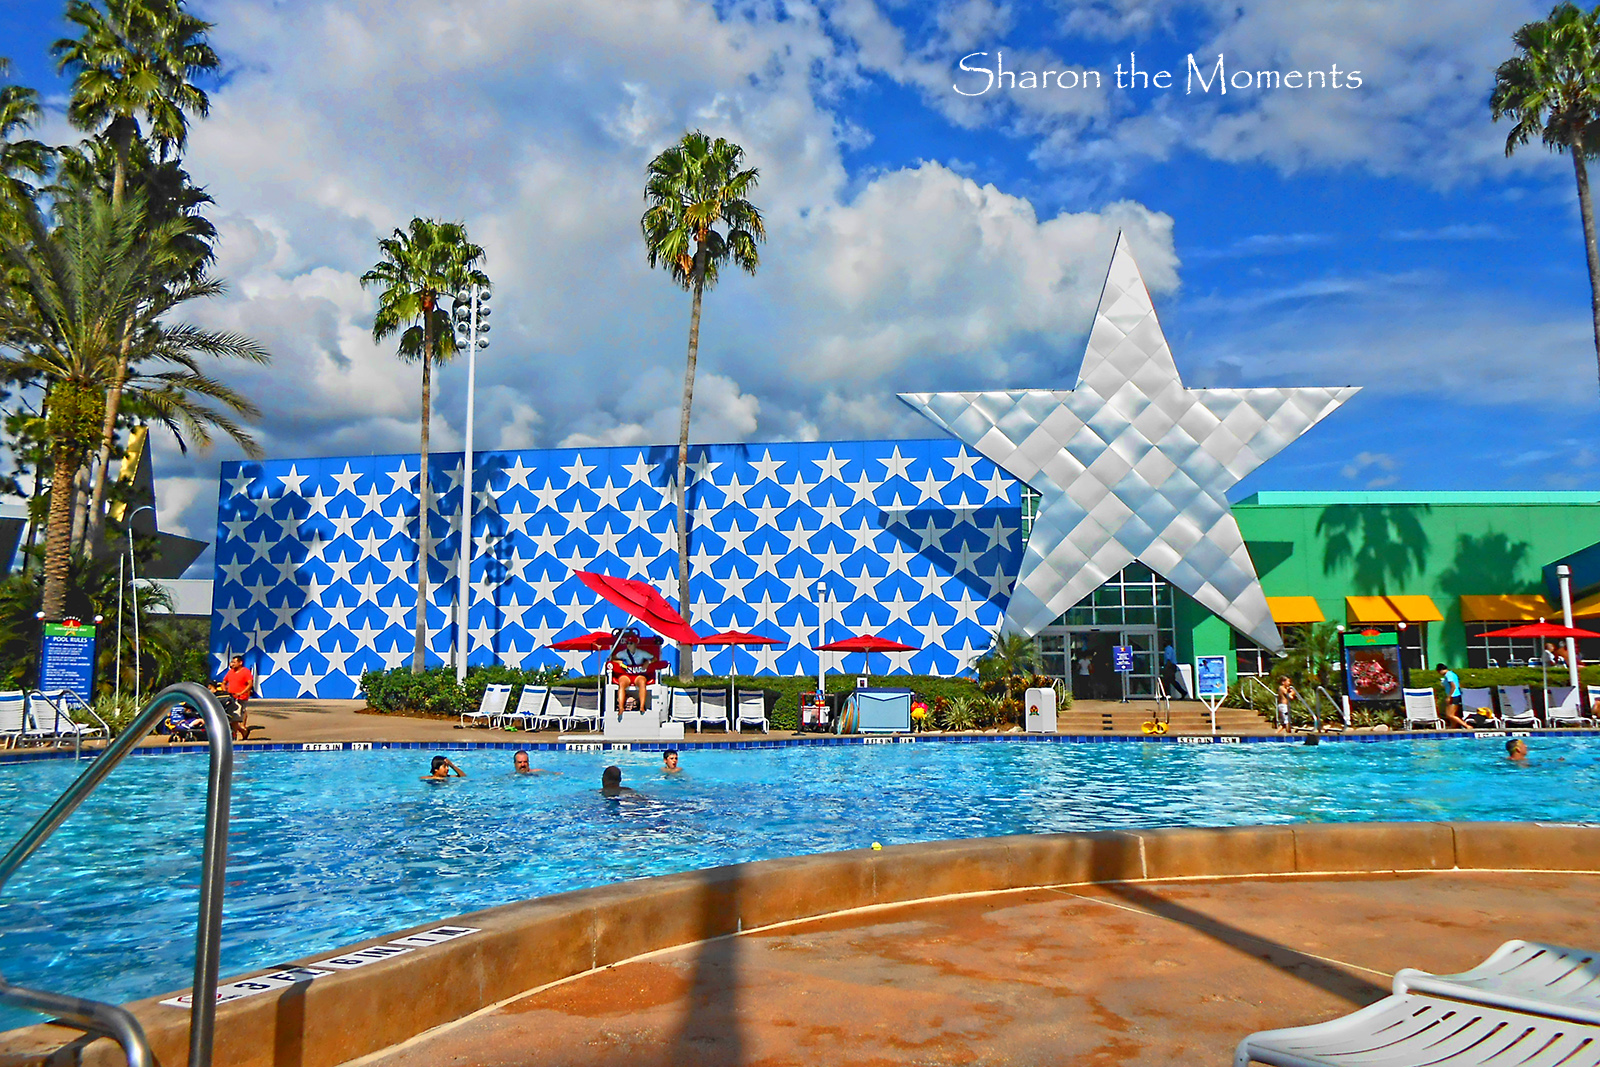 Our October visit to Walt Disney World All Star Resorts|Sharon the Moments Blog